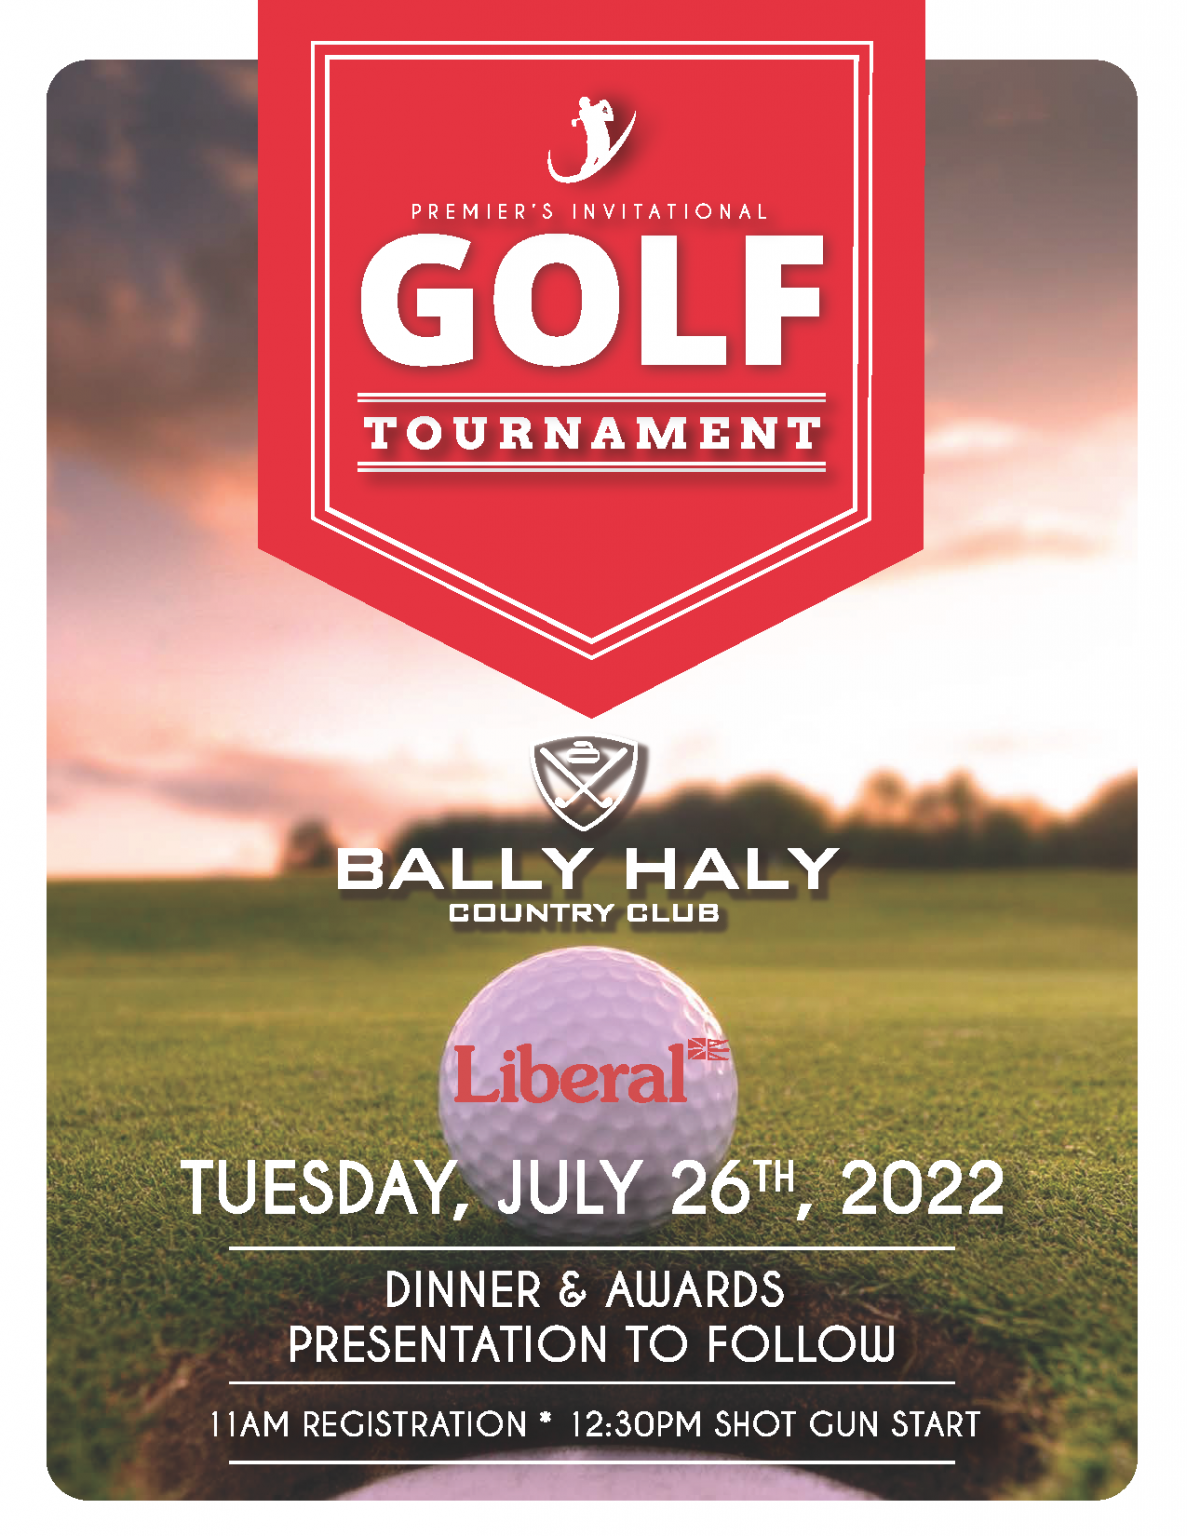 Premier’s Invitational Golf Tournament 2022 | Liberal Party of ...